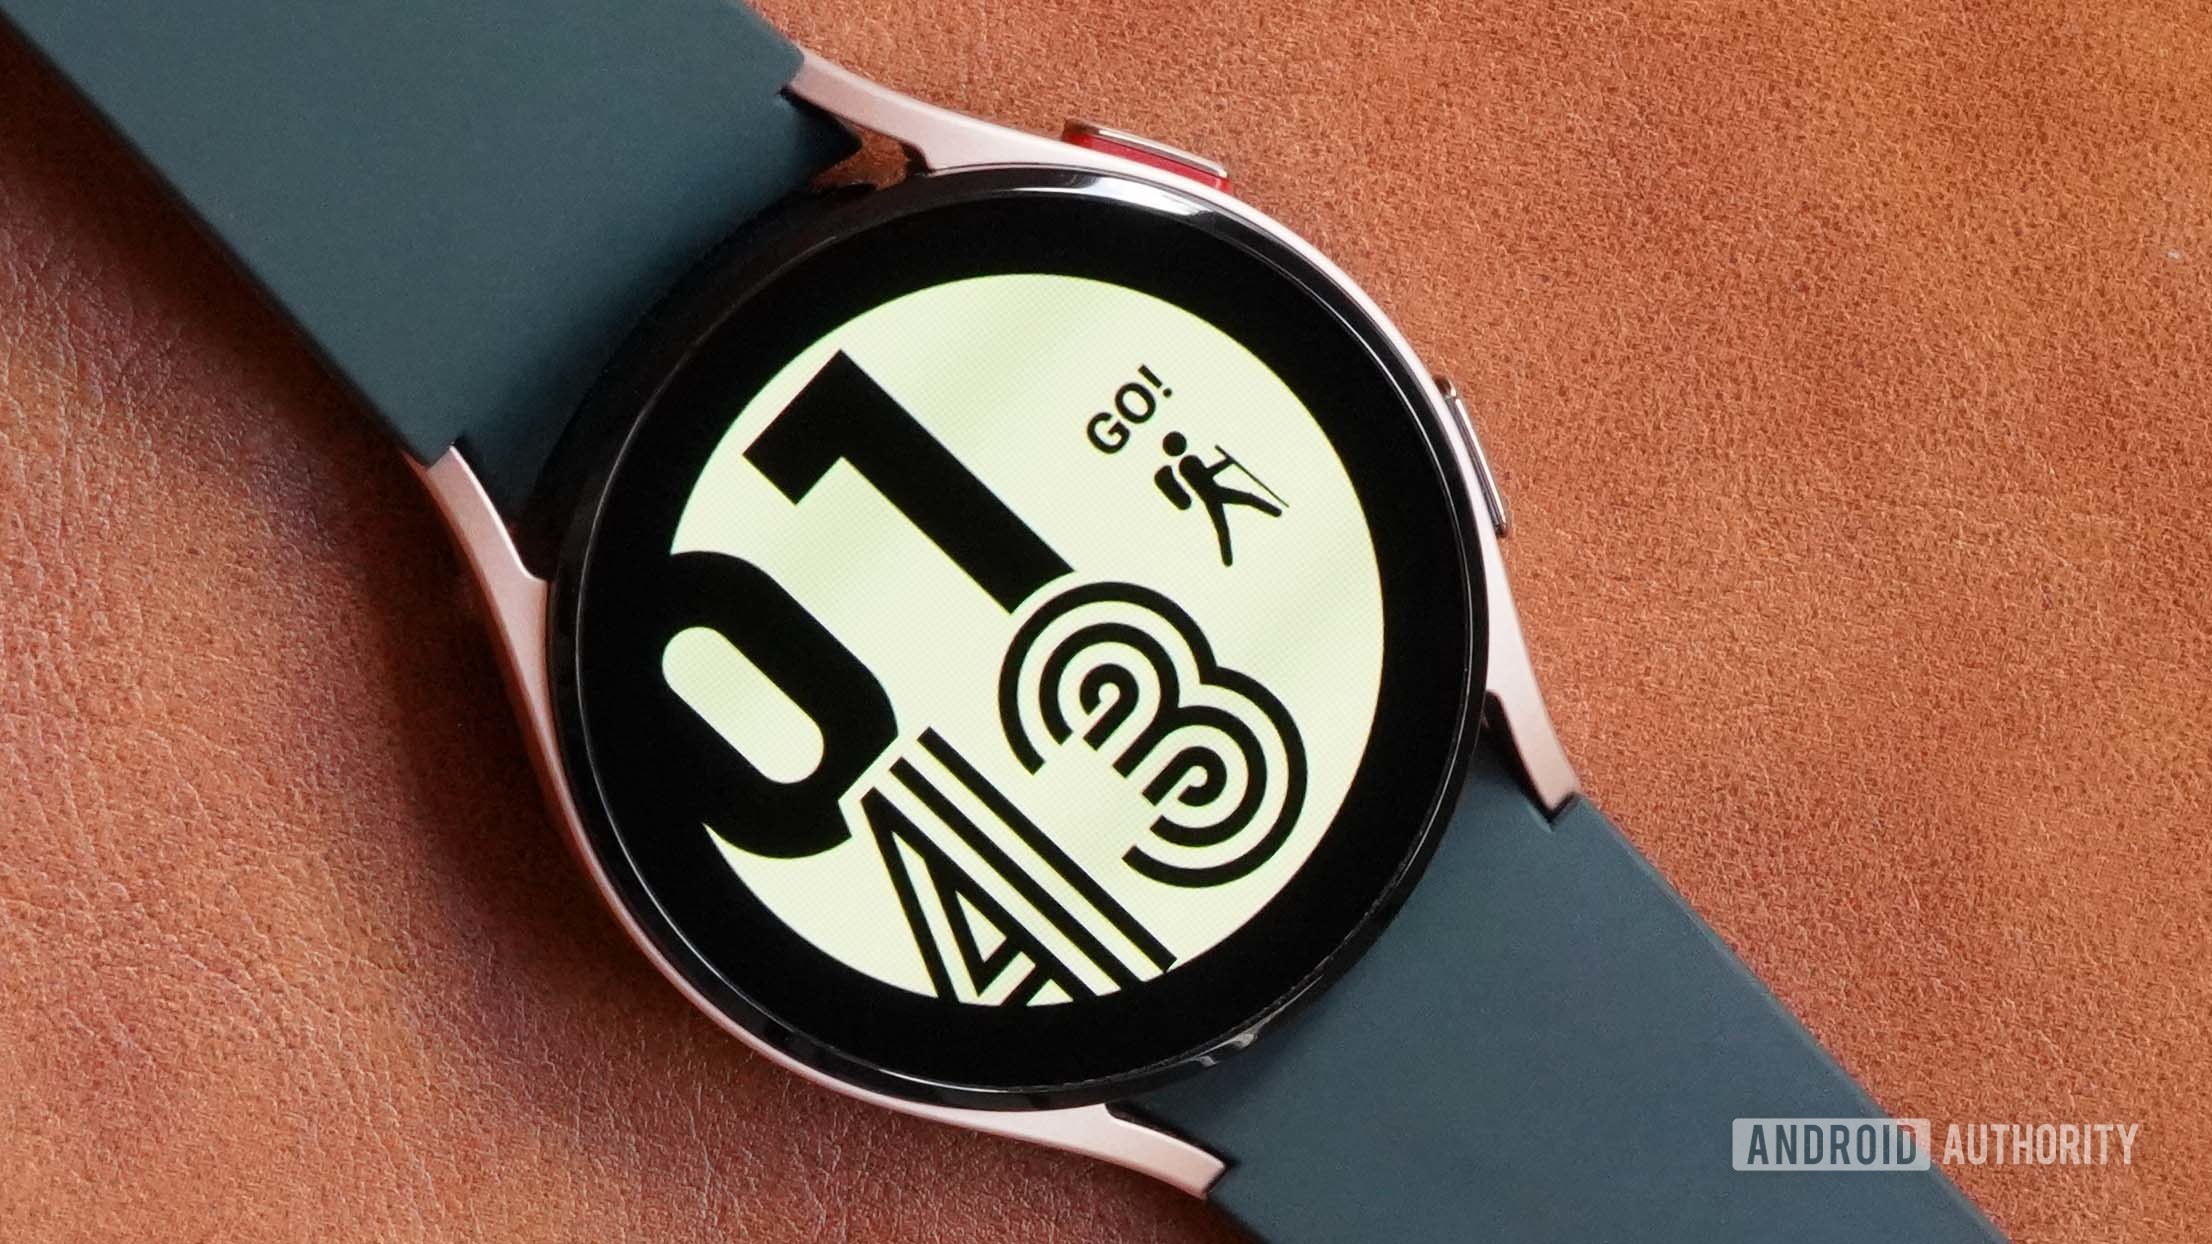 A Samsung Galaxy Watch 4 on a leather surface displays the watch face Active.